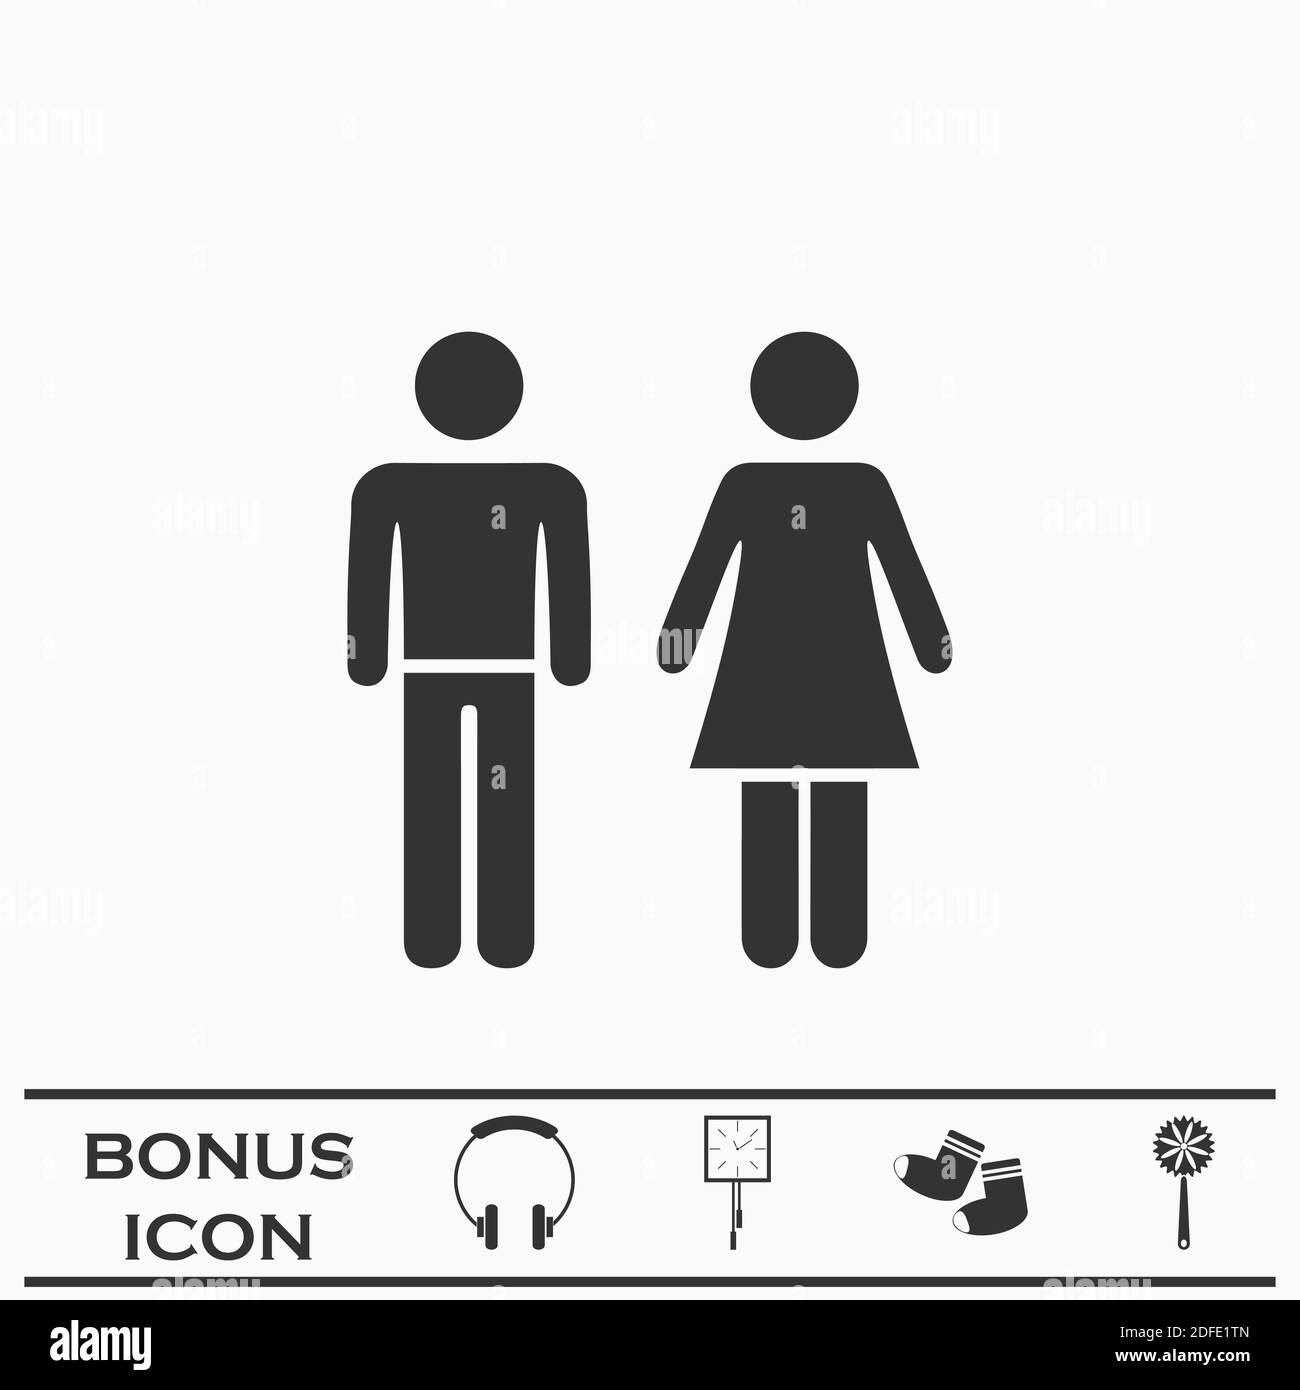 Man and woman icon flat. Black pictogram on white background. Vector illustration symbol and bonus button Stock Vector